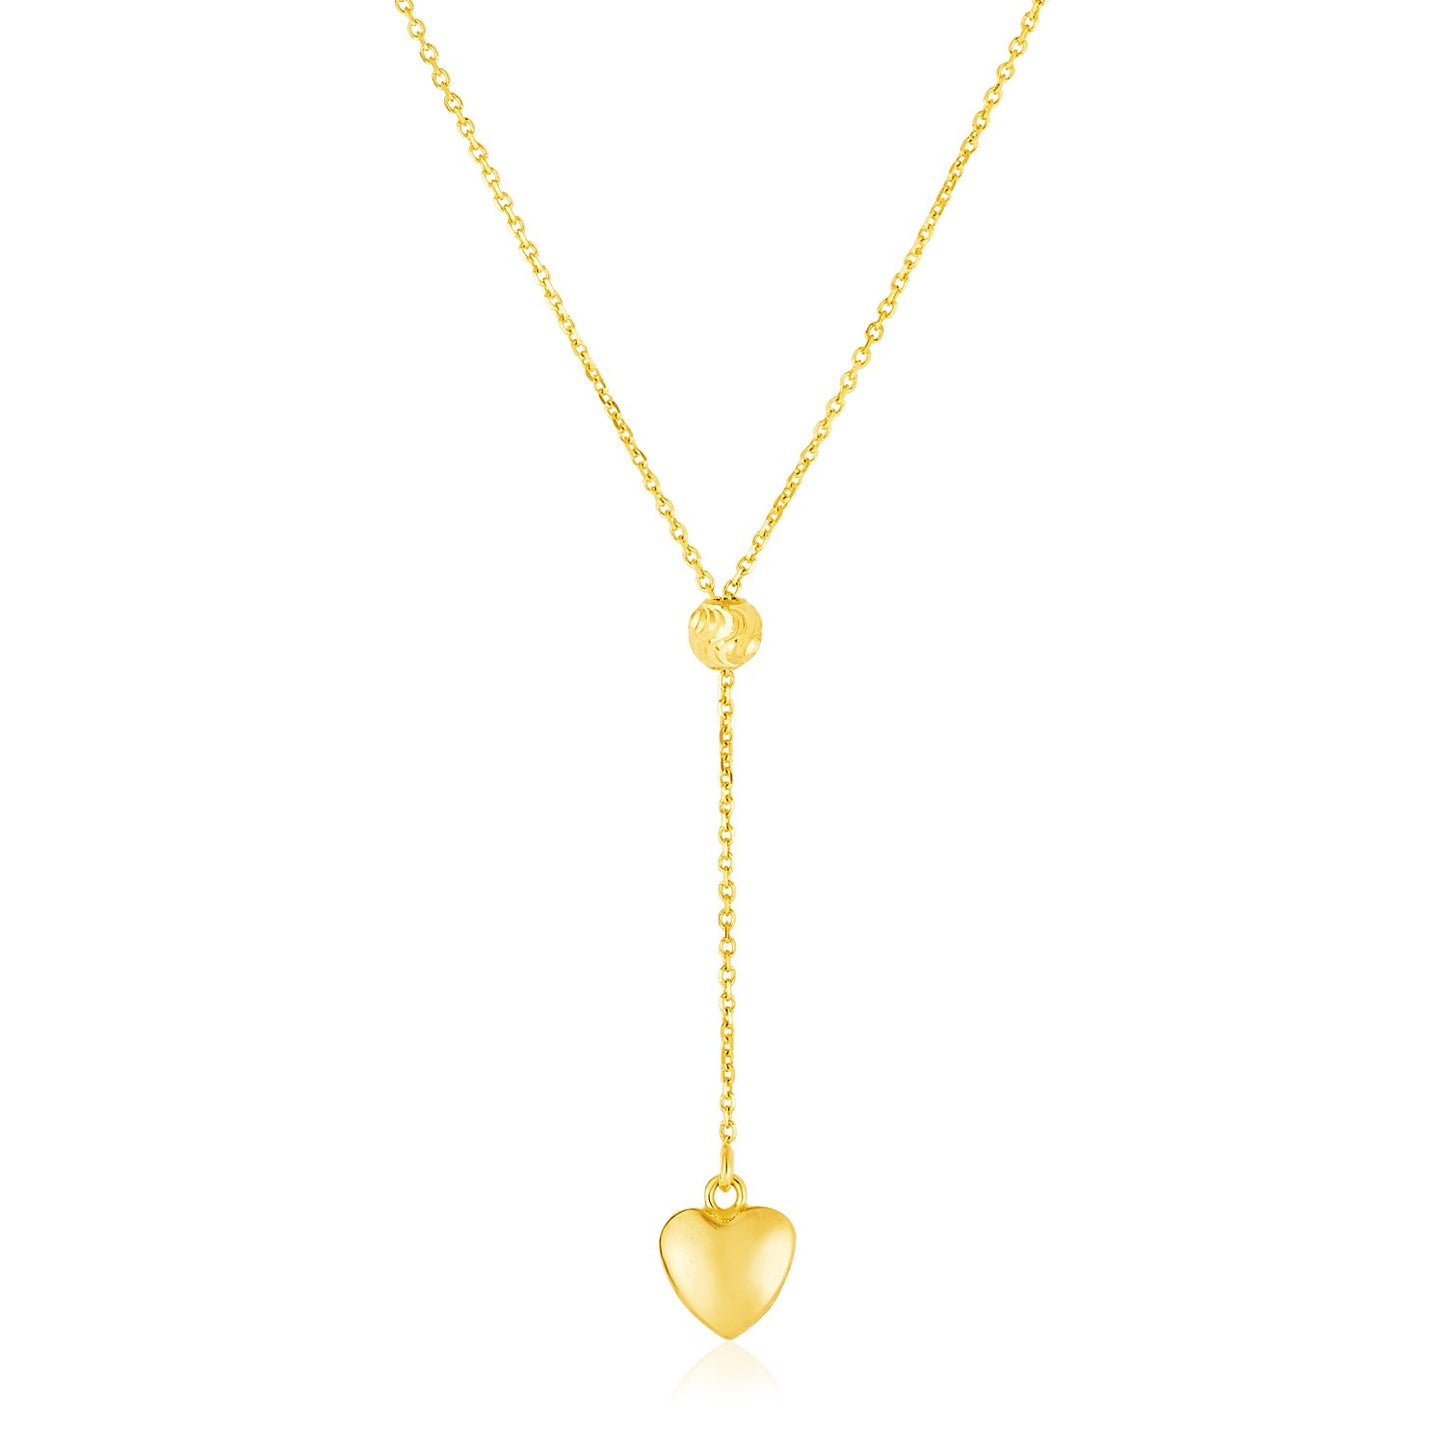 14k Yellow Gold Lariat Style Necklace with Heart